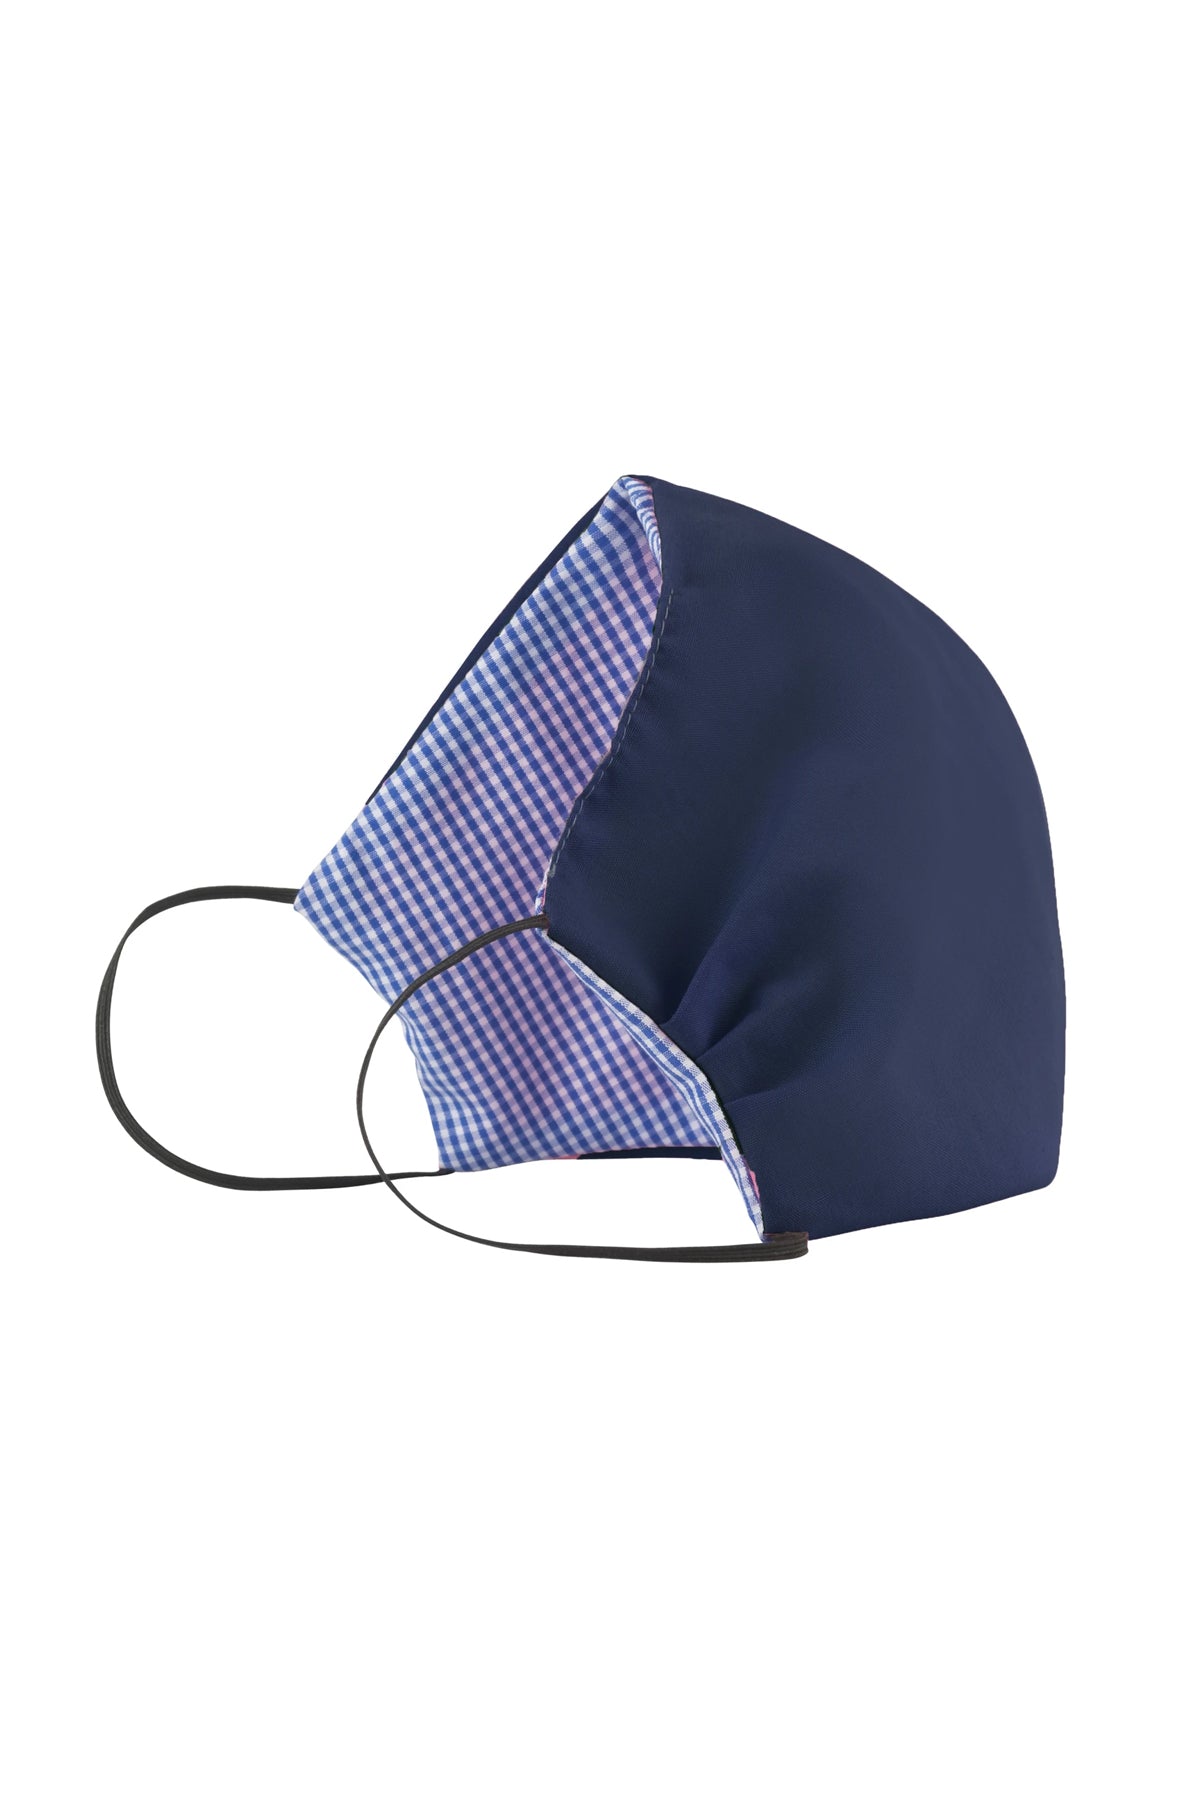 Women' Business Face Mask - Navy with Checks NORA GARDNER | OFFICIAL STORE for work and office